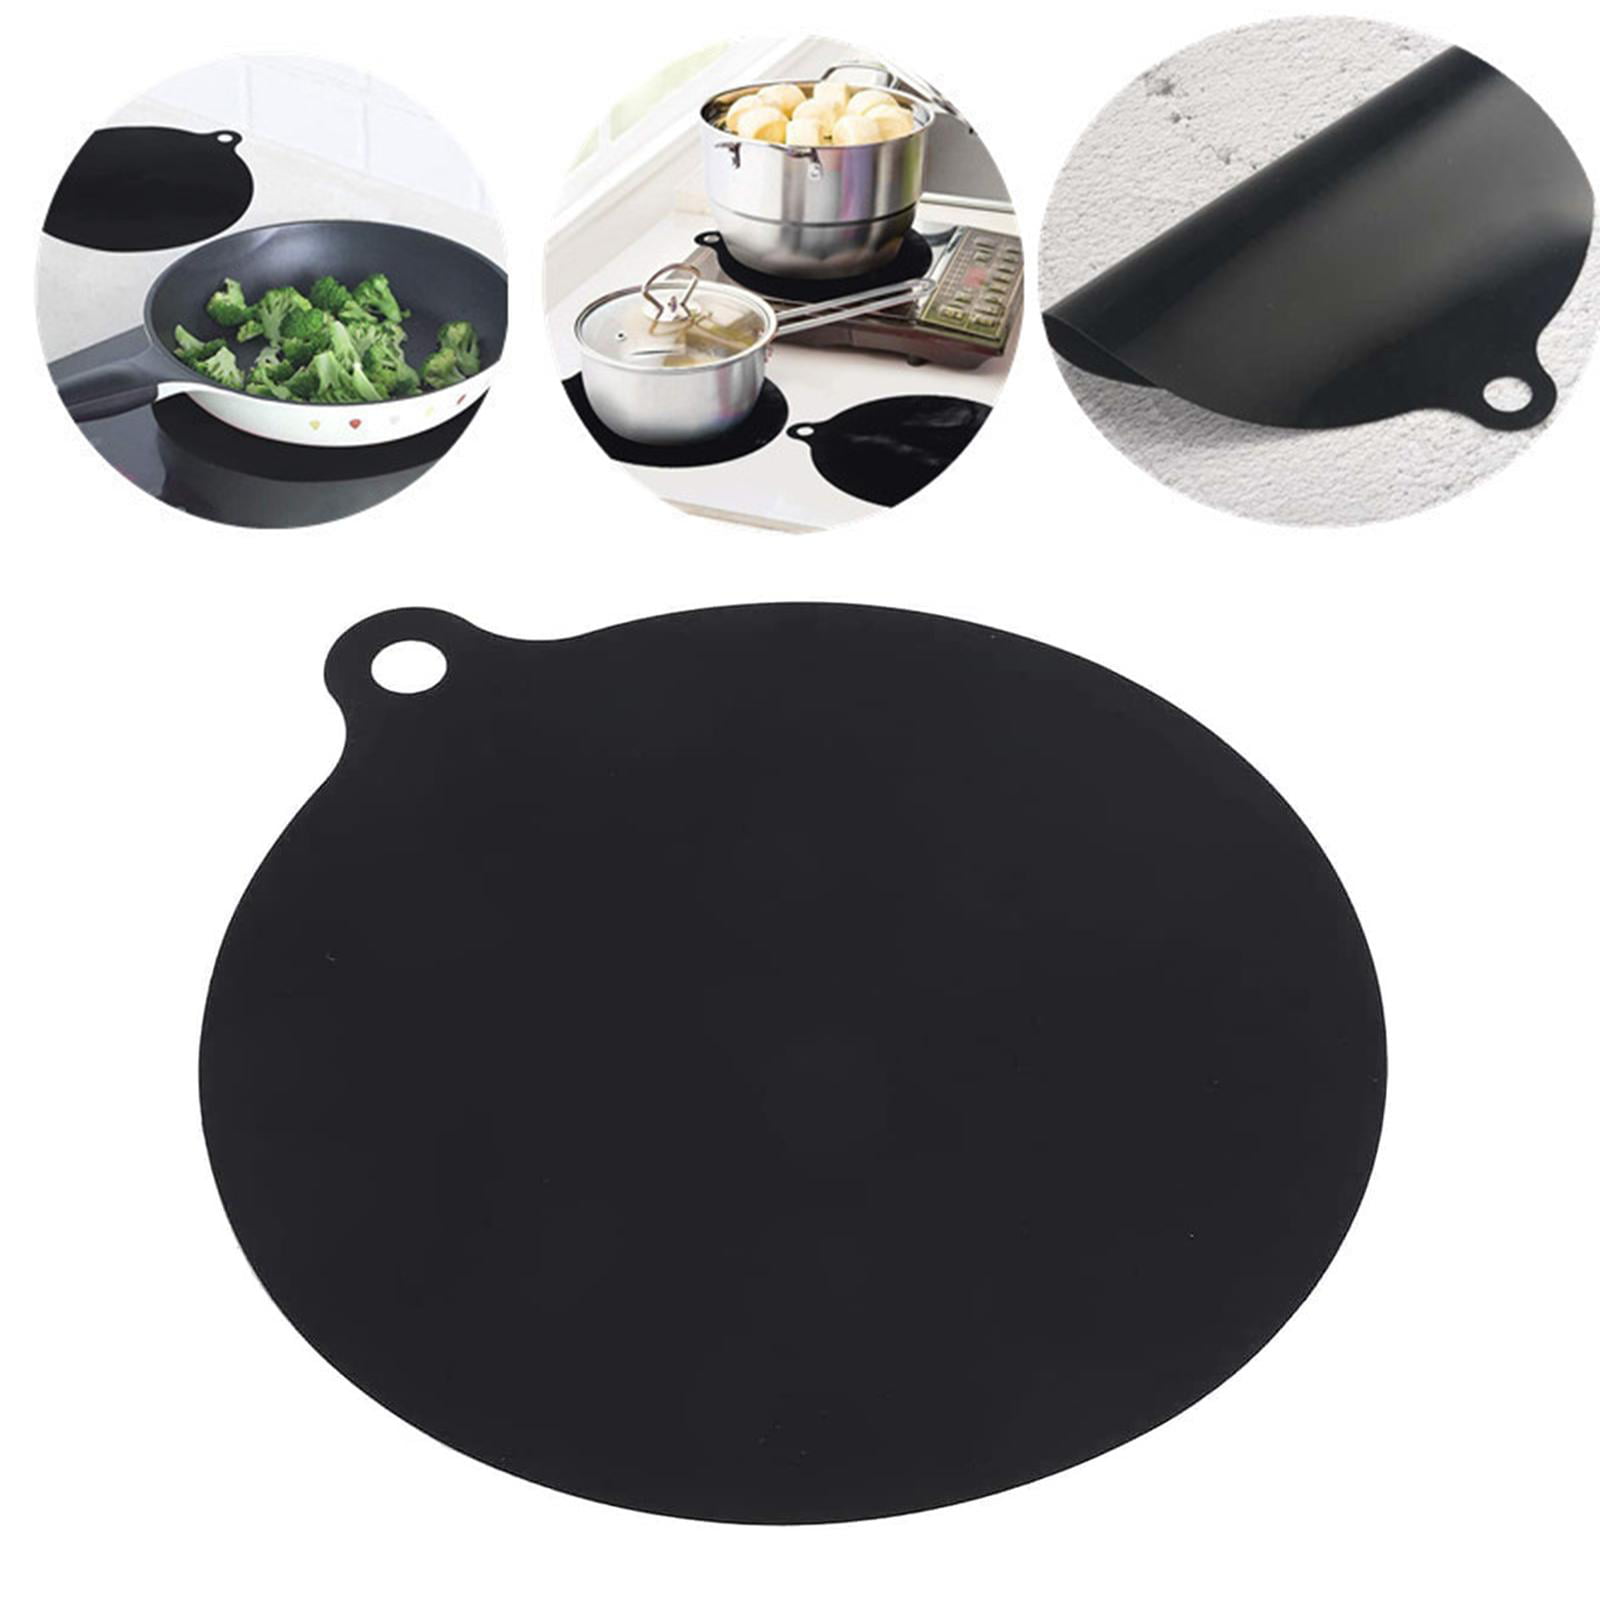 Generic iSH09-M416932mn Cook's Aid Induction Cooktop Protector Mat